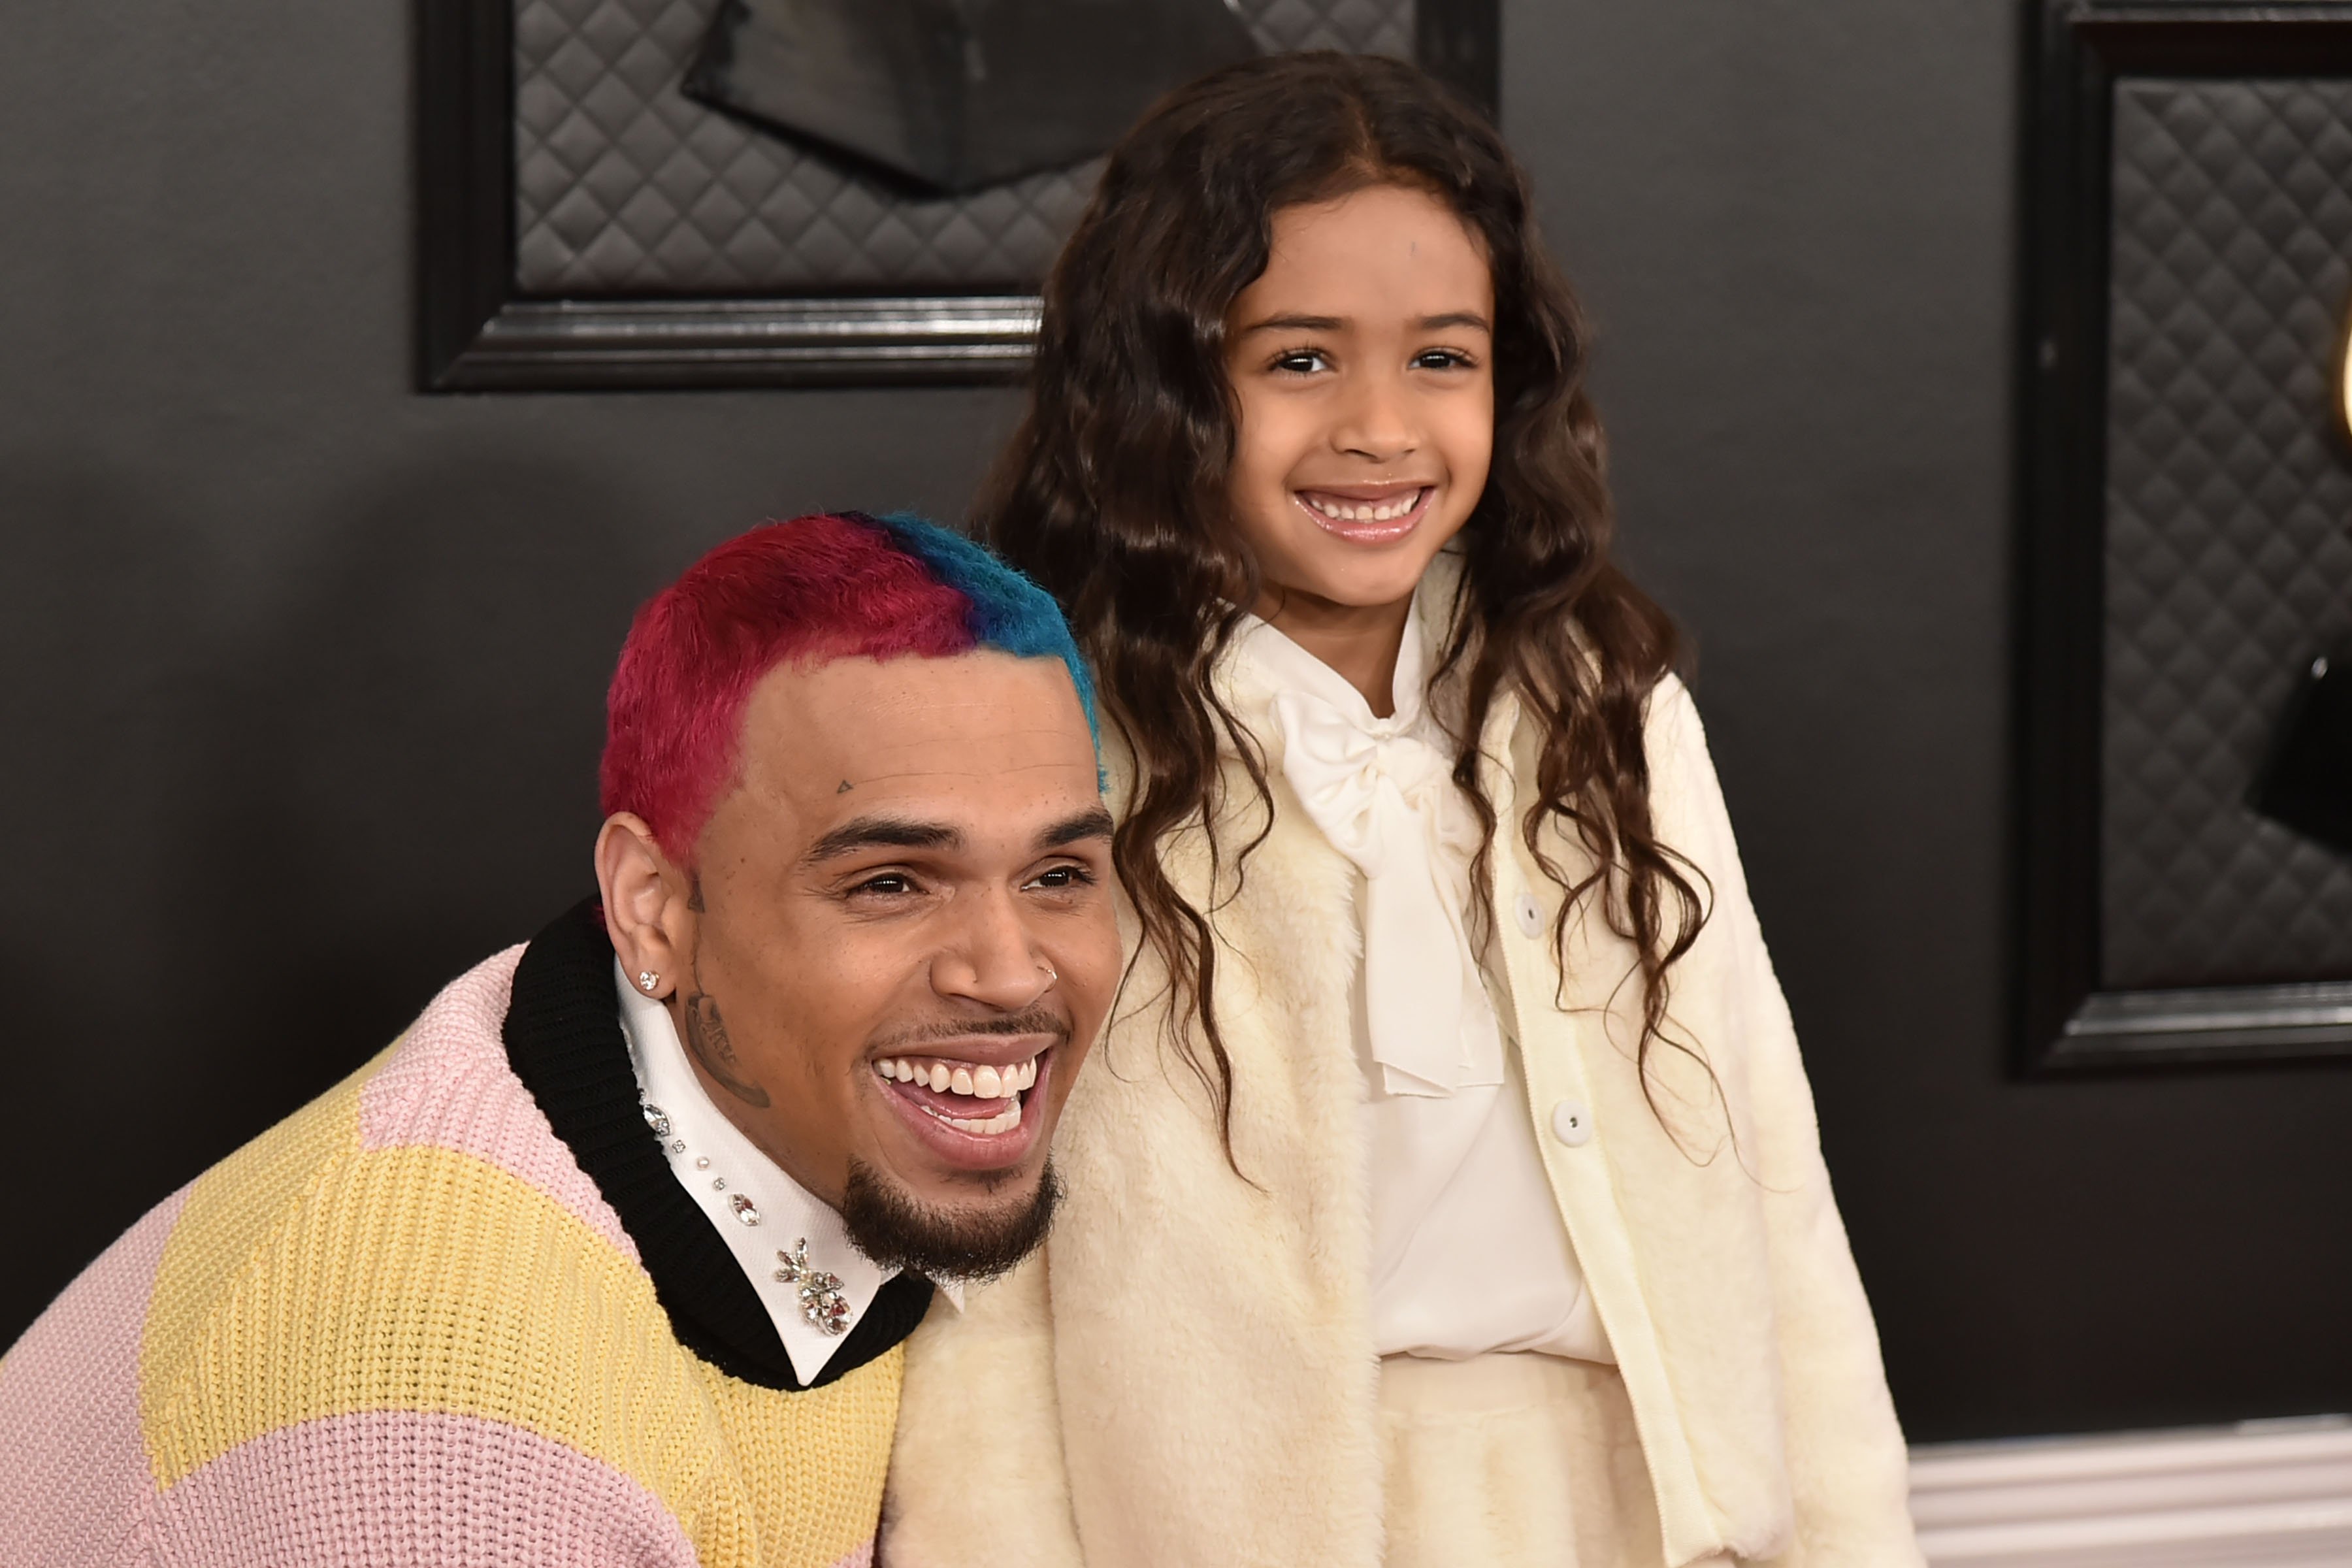 Chris Brown and Royalty Brown at the 62nd Annual Grammy Awards at Staples Center on January 26, 2020 in Los Angeles, California | Photo: Getty Images